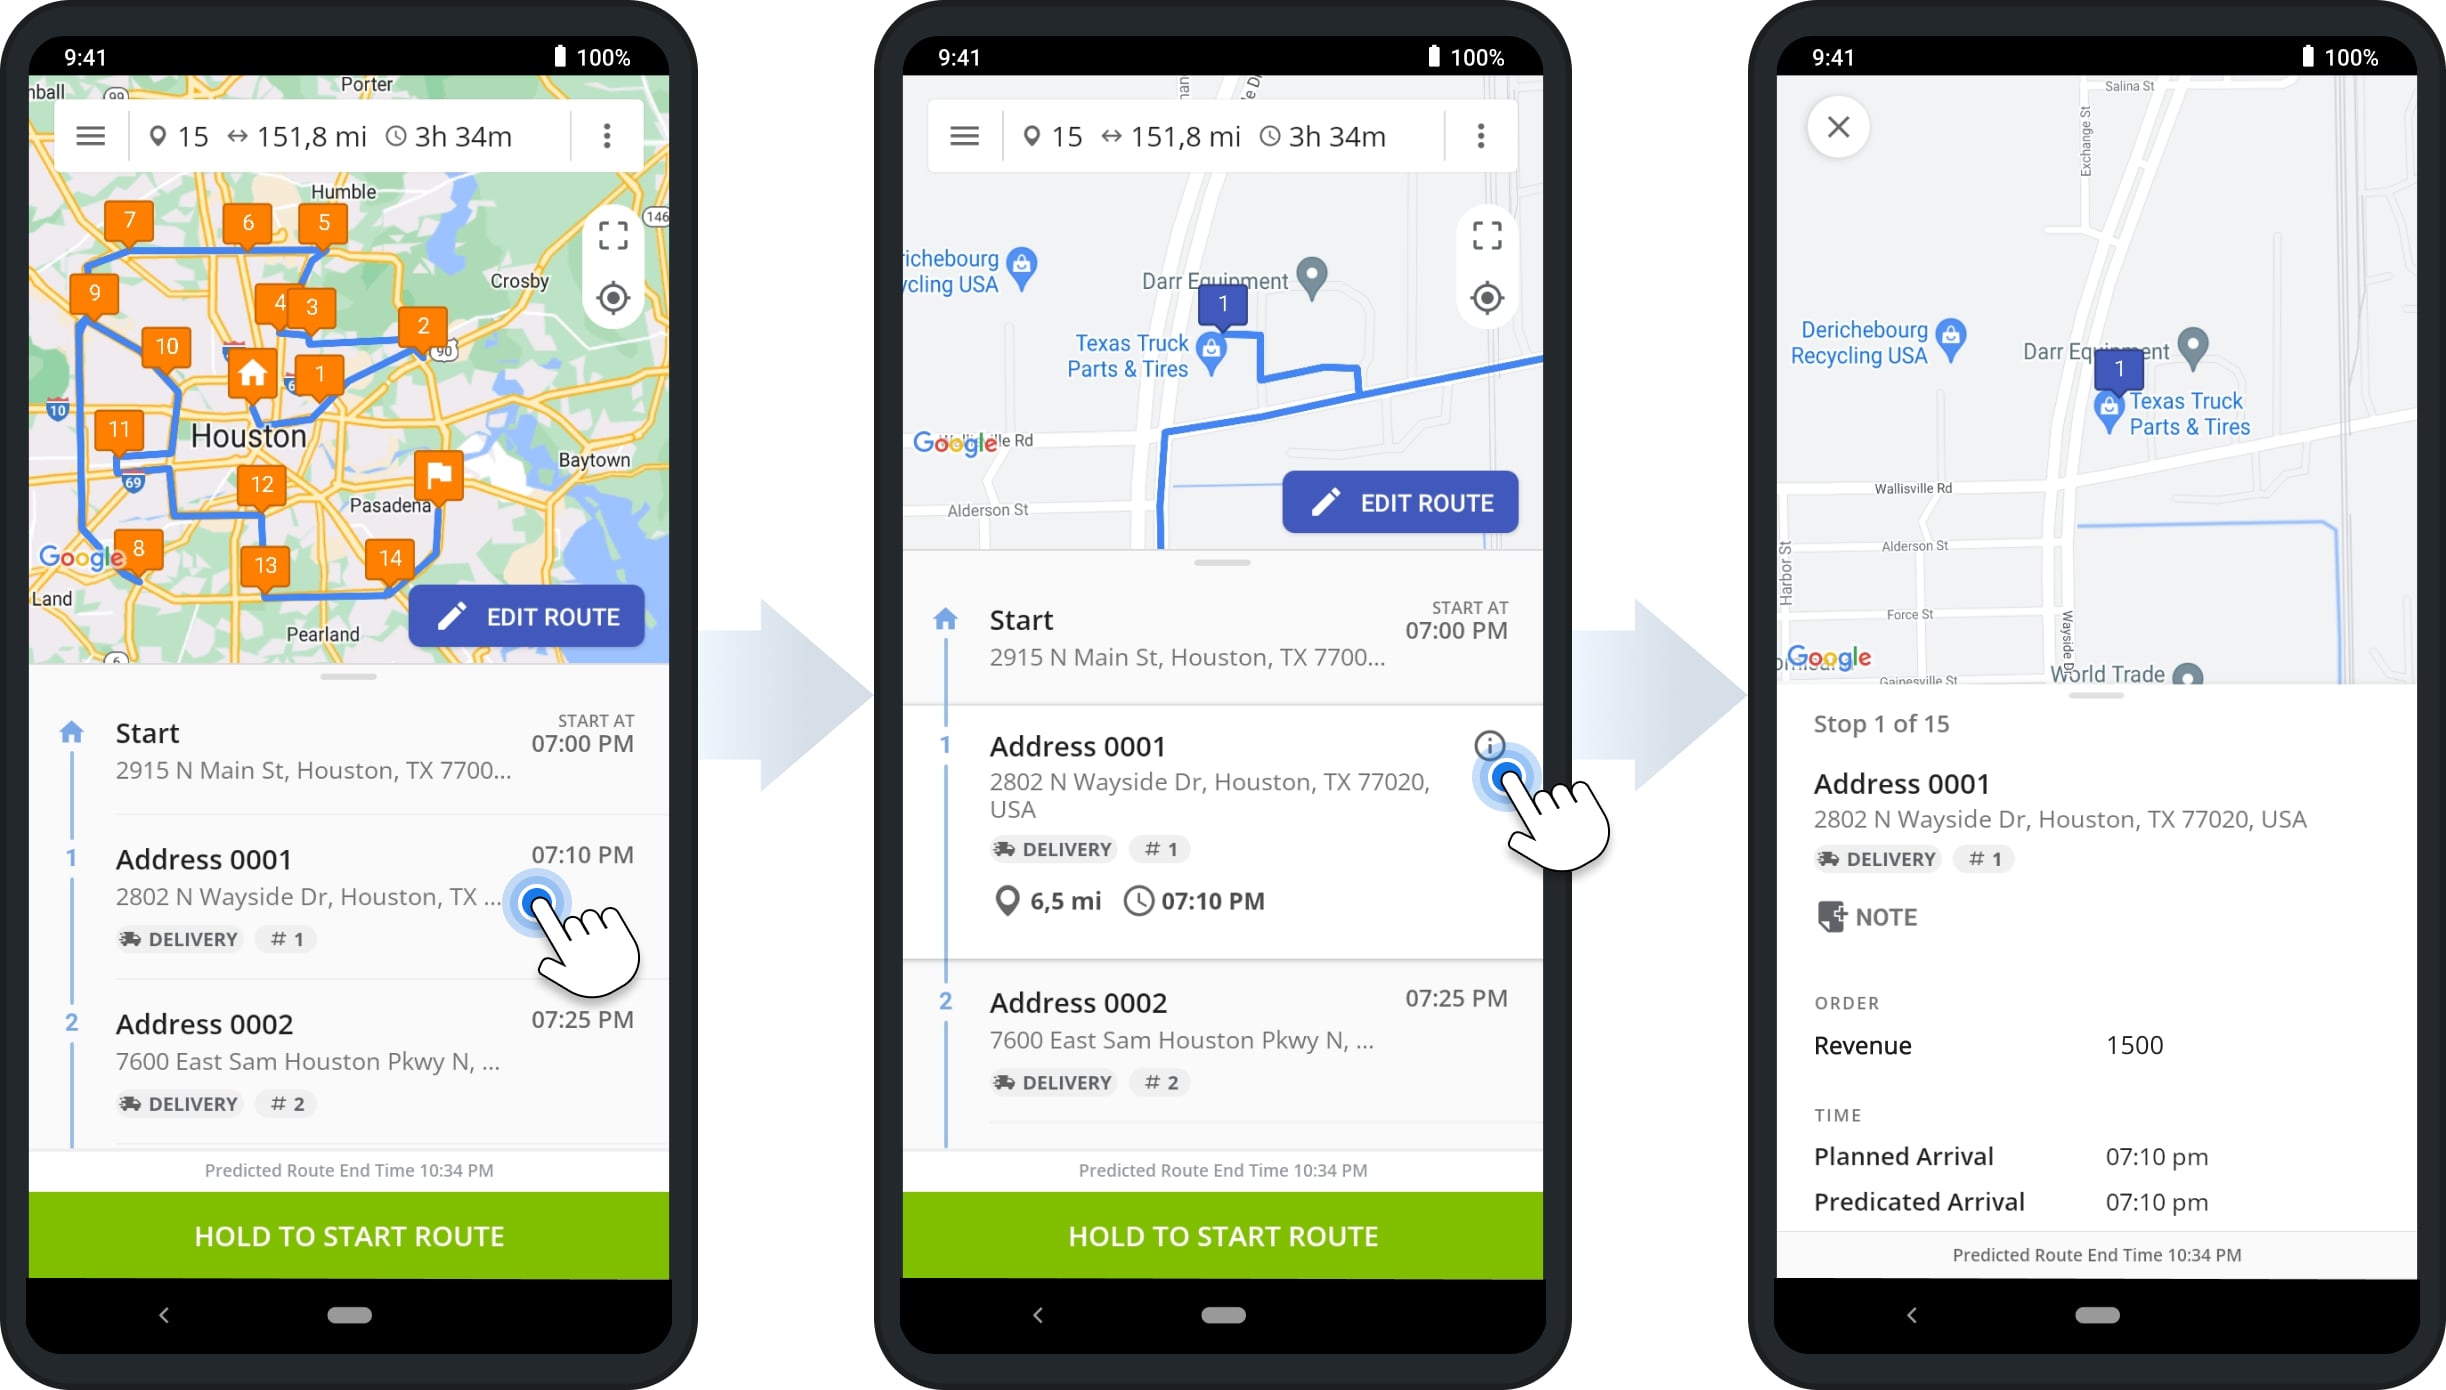 To view Revenue on the mobile Route Planner App, open the route, tap the preferred destination, and then tap the Information Icon to open the Destination Info.